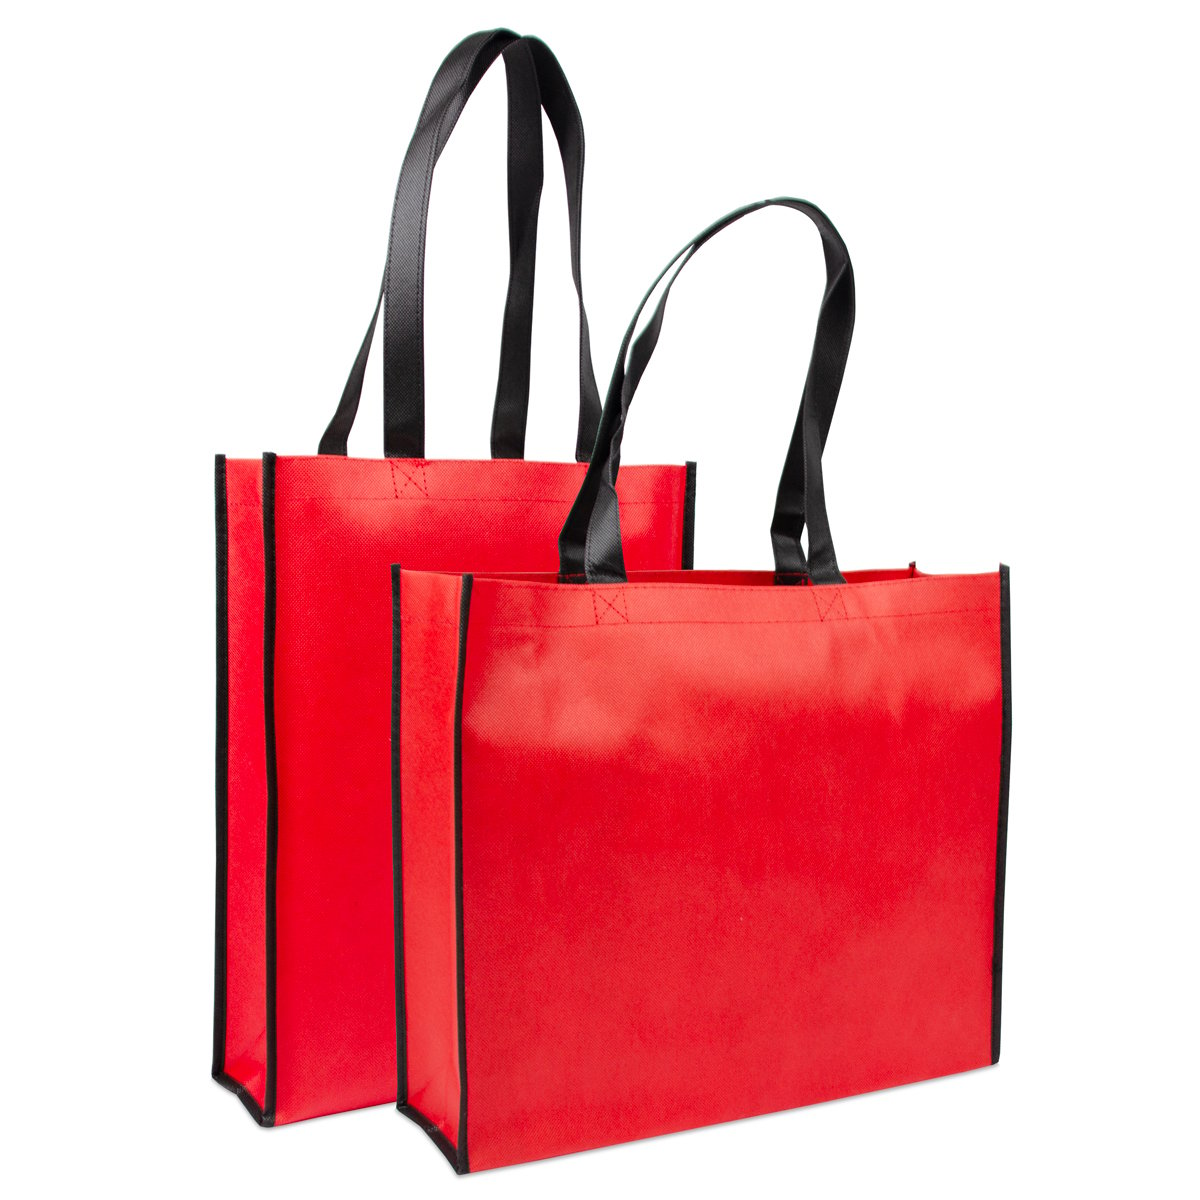 Non-woven shoppers - rood_zwart duotone rood groep